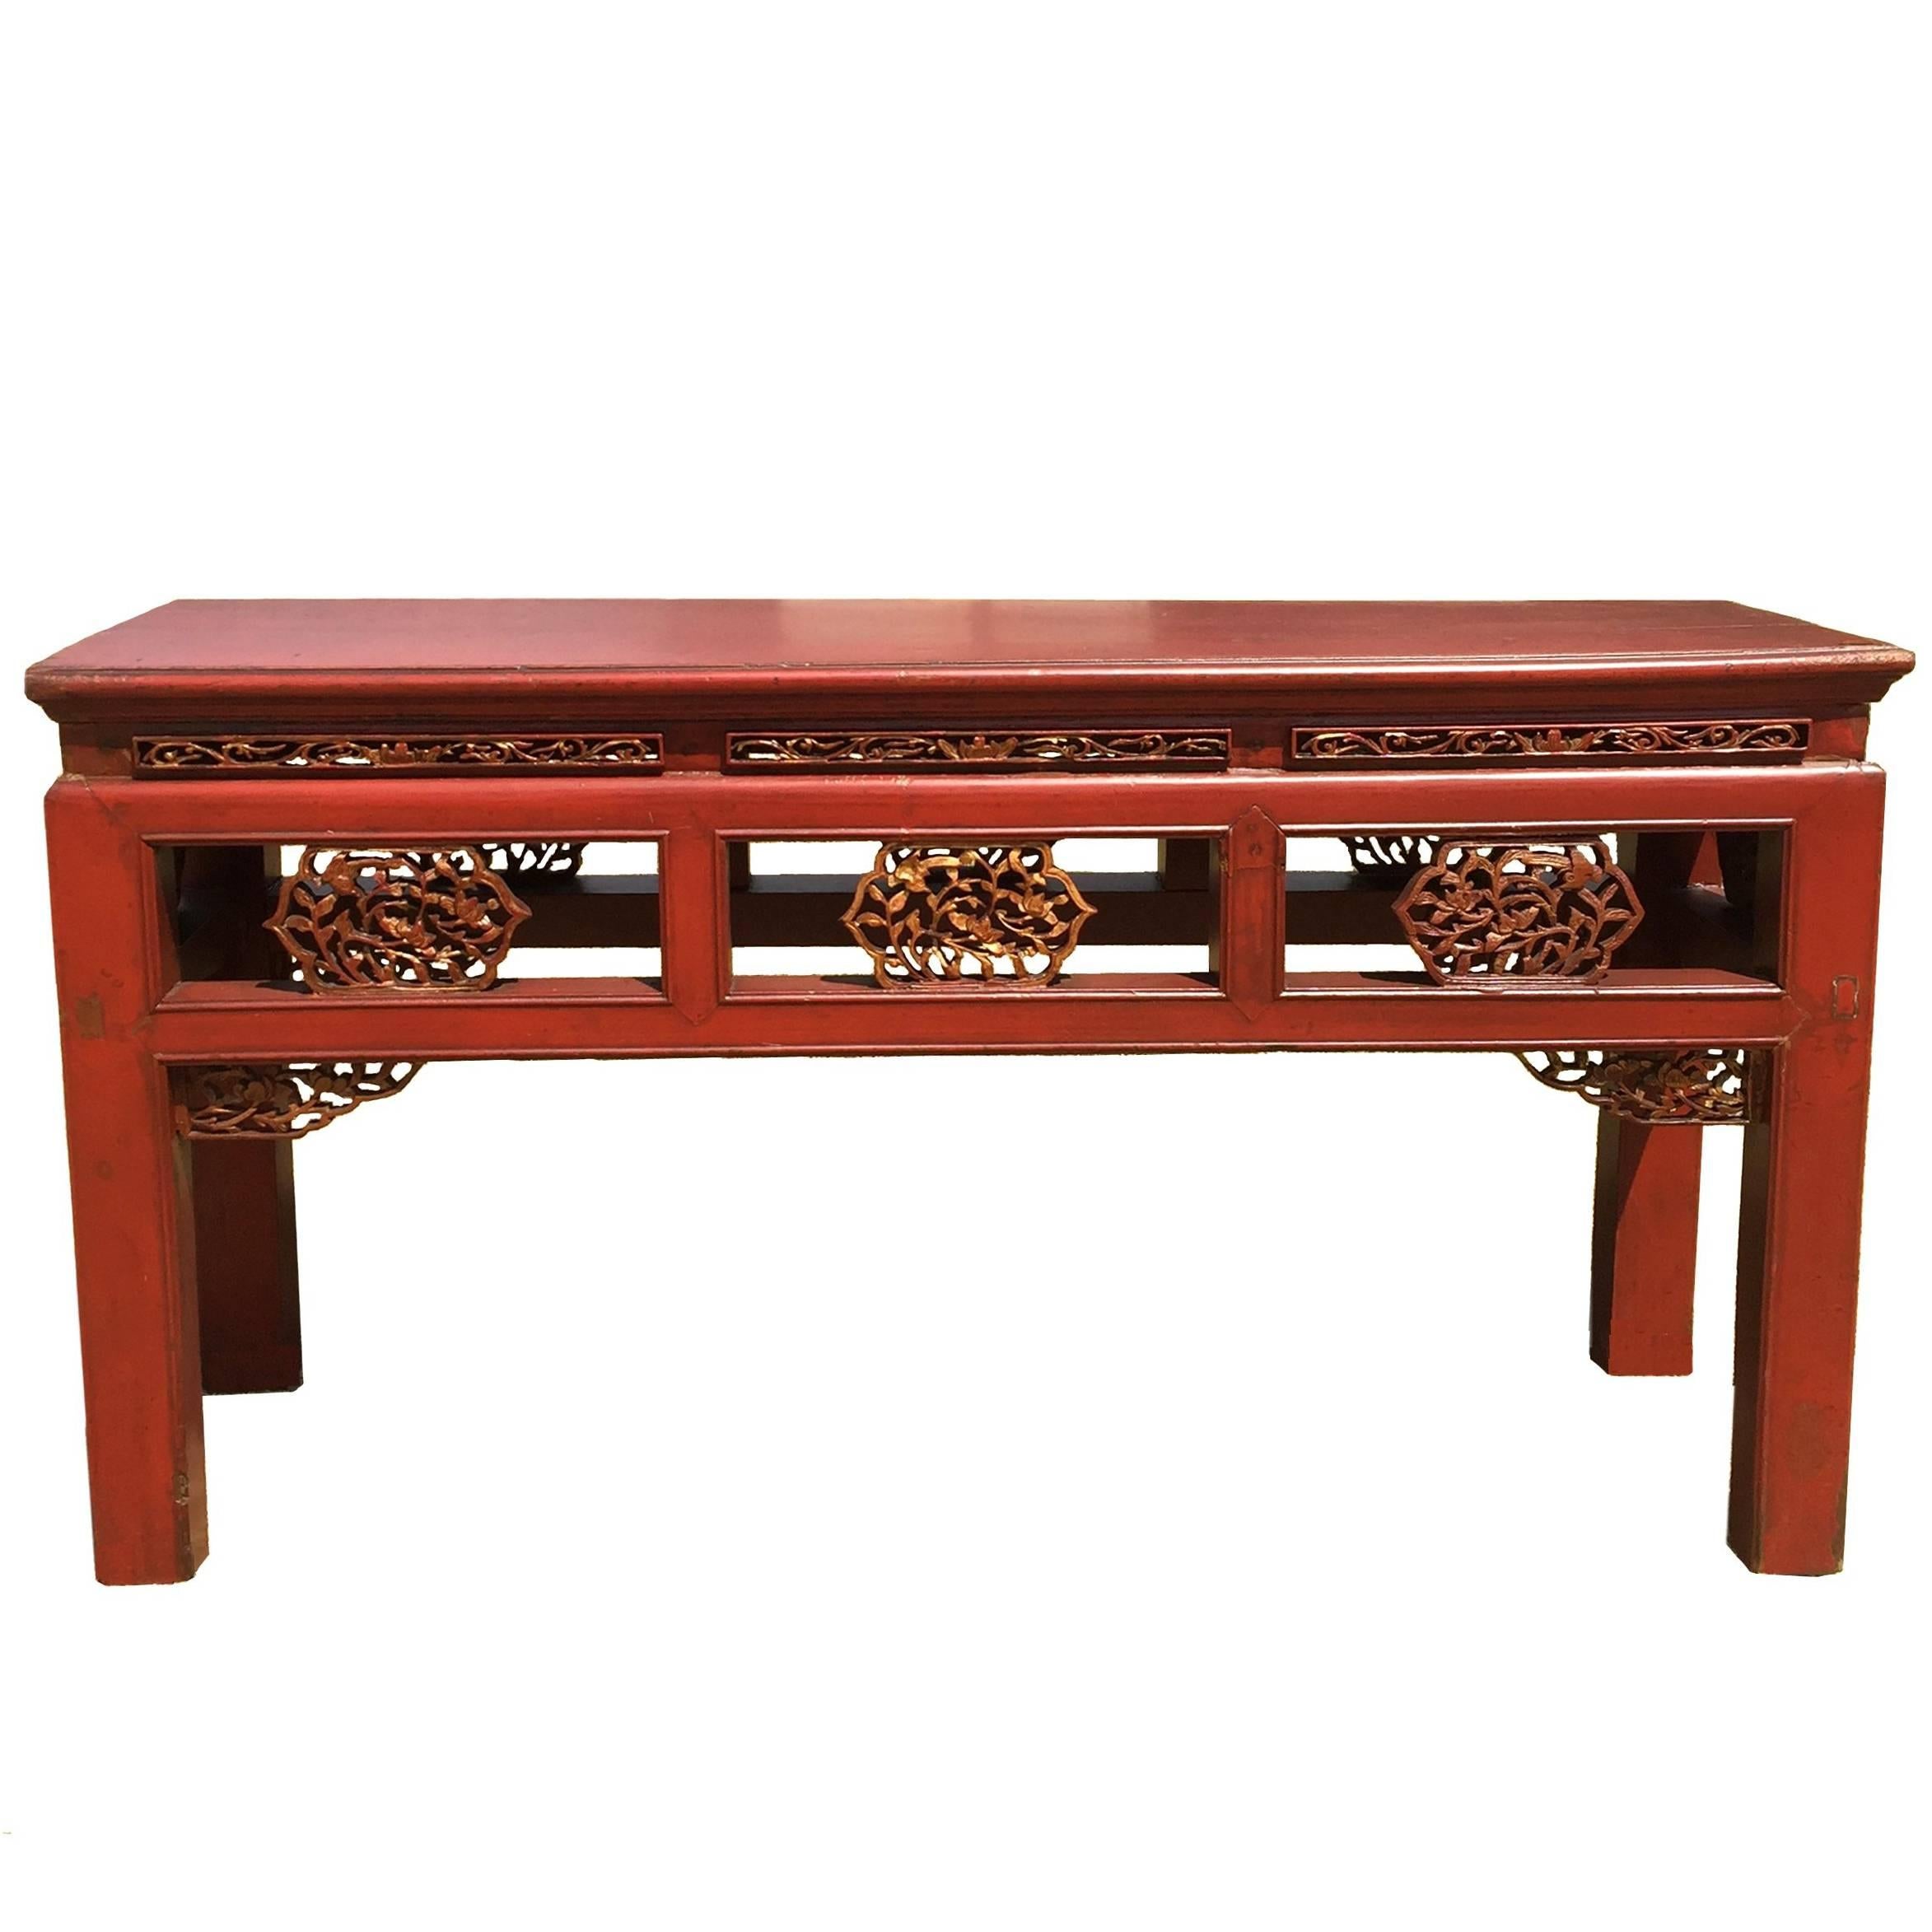 A pair of rare, antique Chinese benches, that are red lacquered and carved on both sides. 

The stunning benches have beautiful red lacquer and finely carved features. The carvings are delicate and deliberate showing scrolled floral and foliage. The